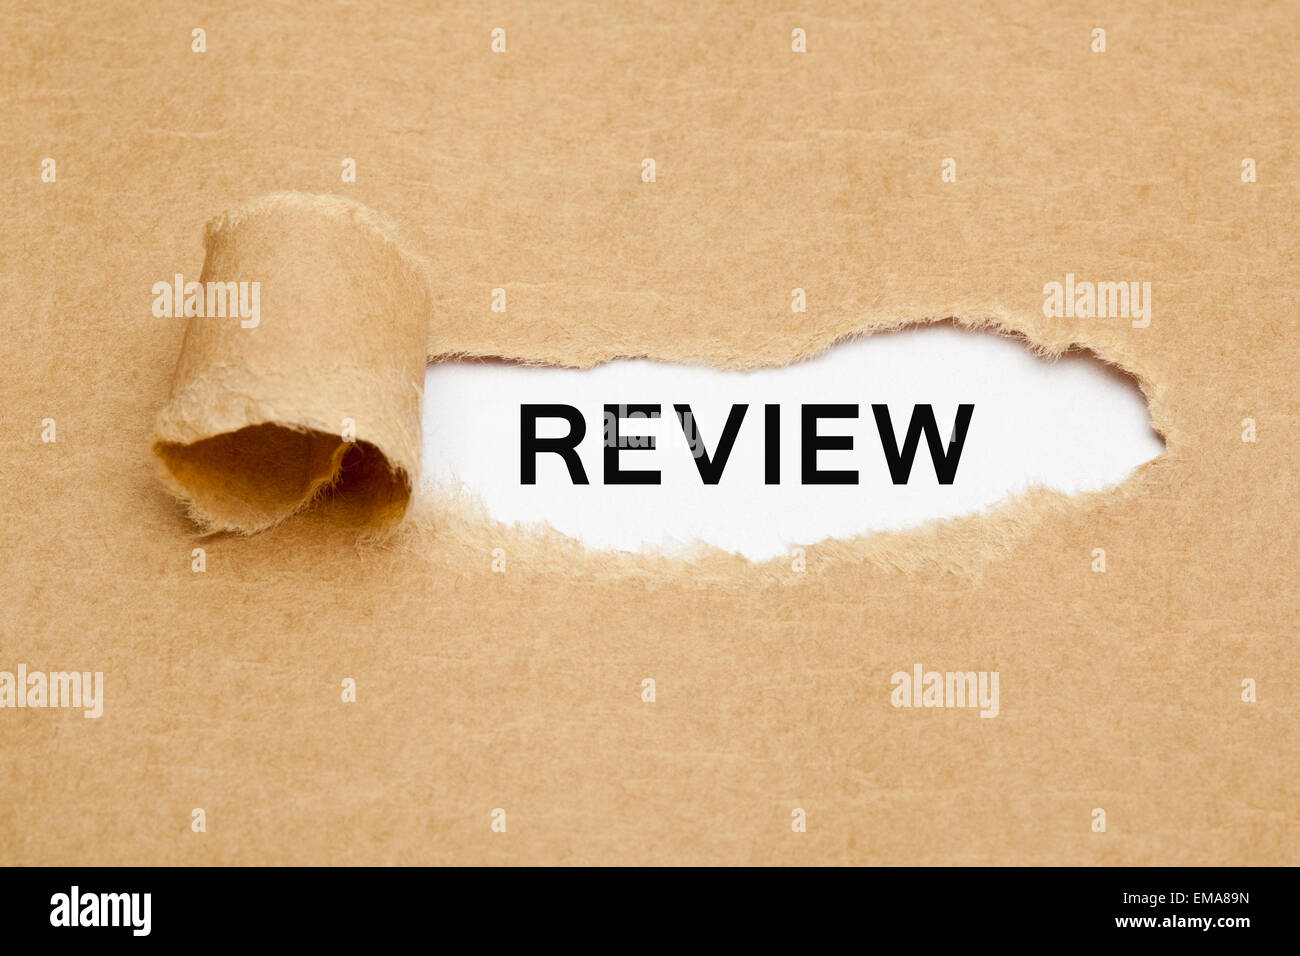 The word Review appearing behind torn brown paper. Stock Photo